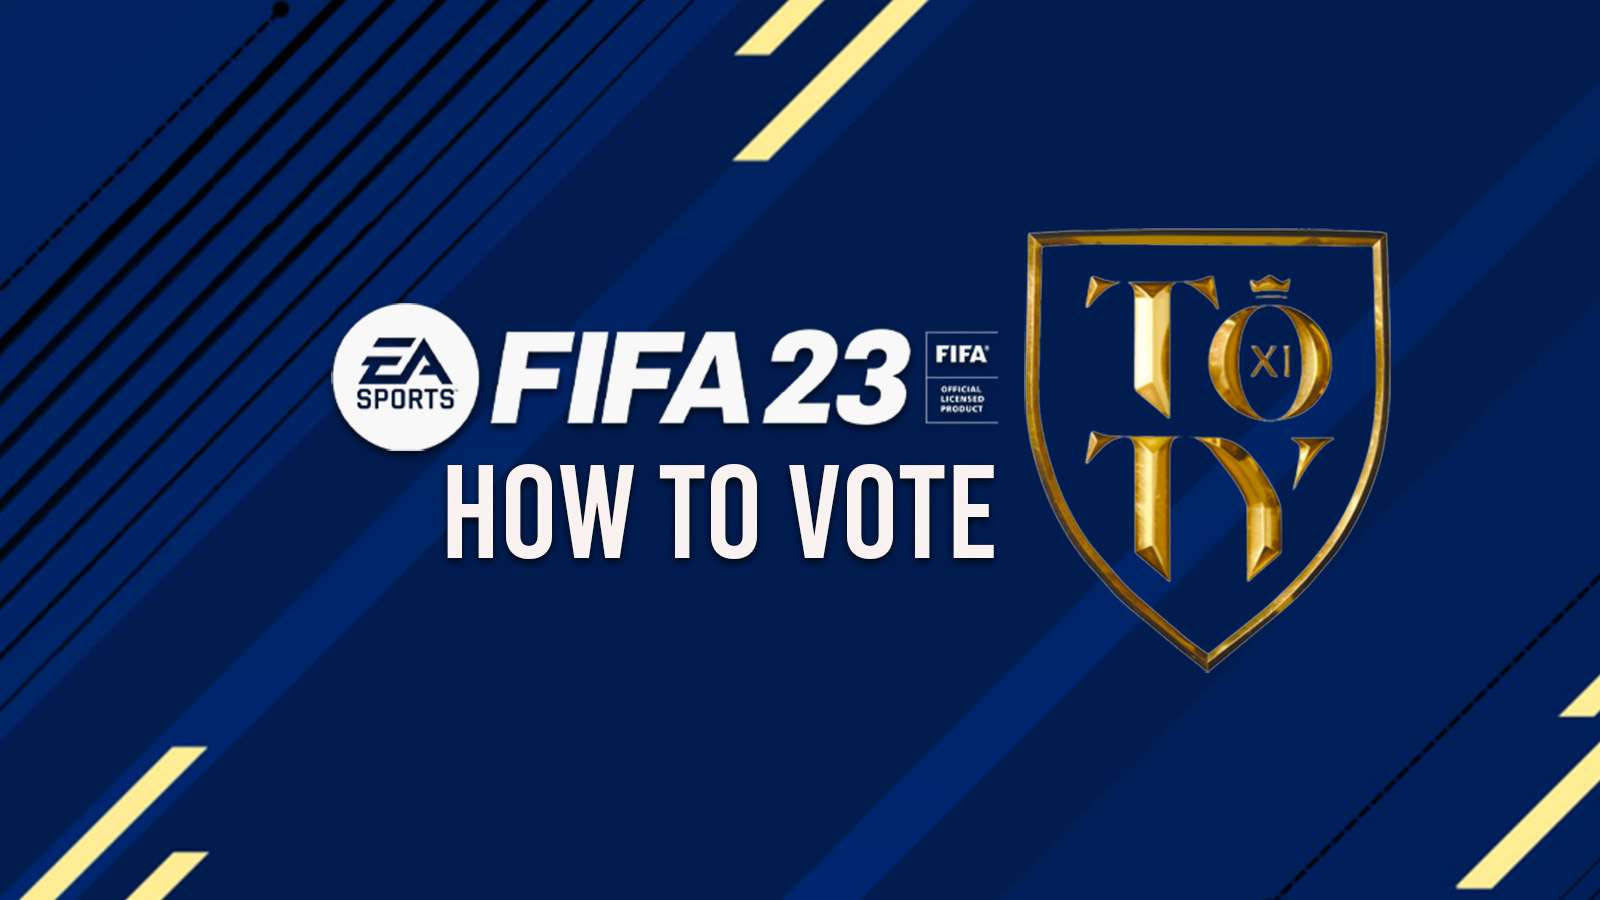 FIFA 23 and TOTY logo on TOTY background